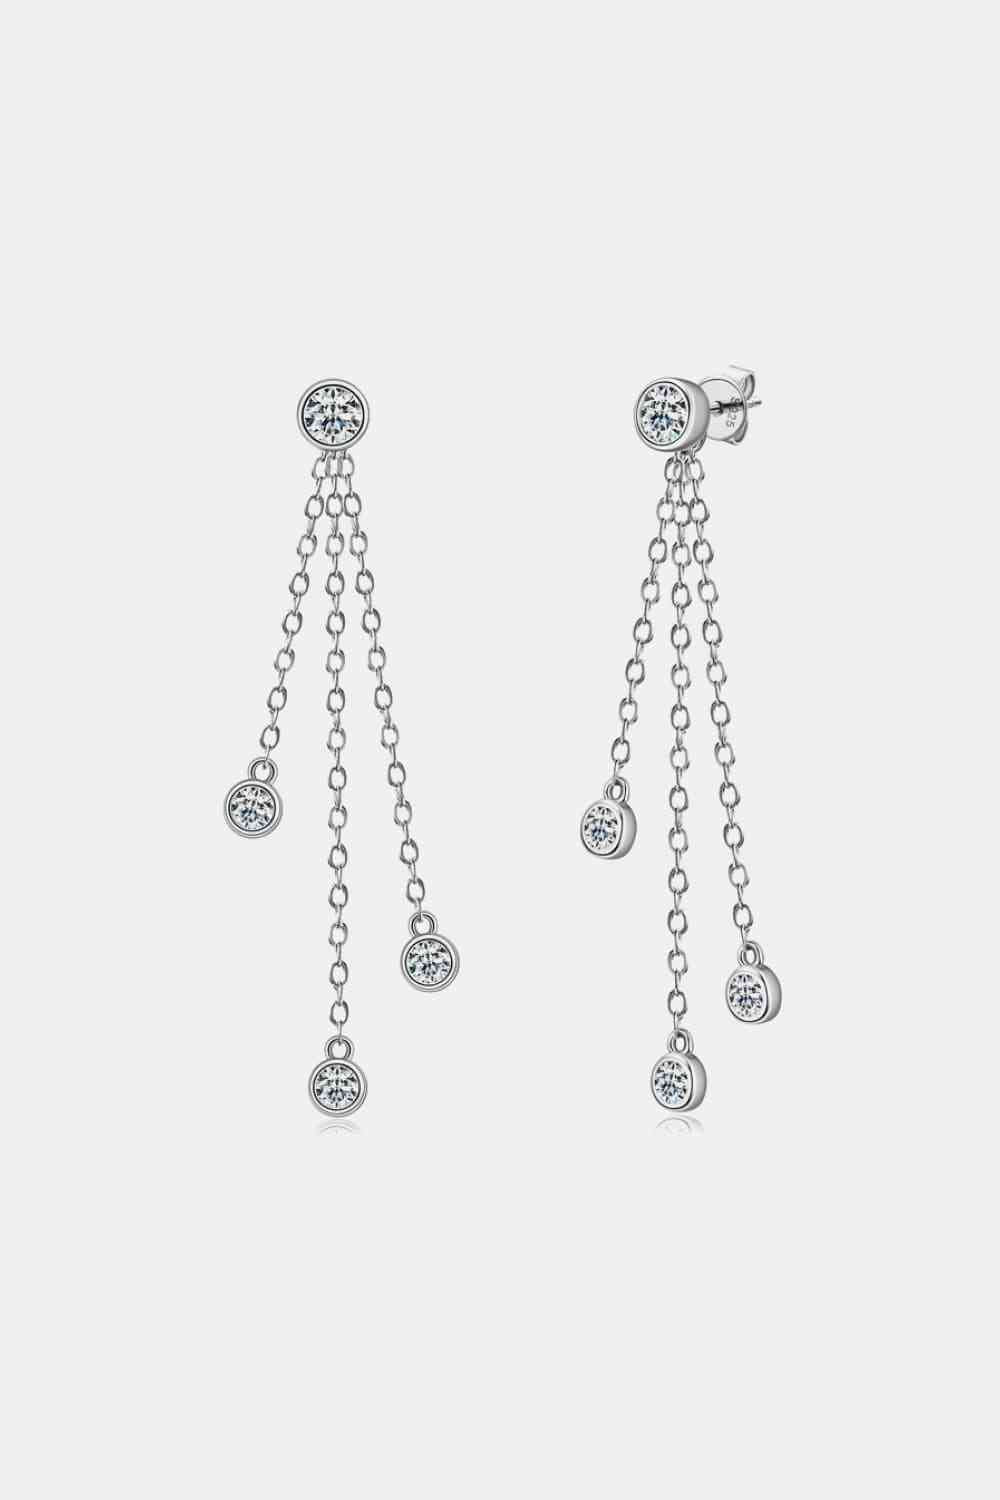 a pair of earrings with dangling chains